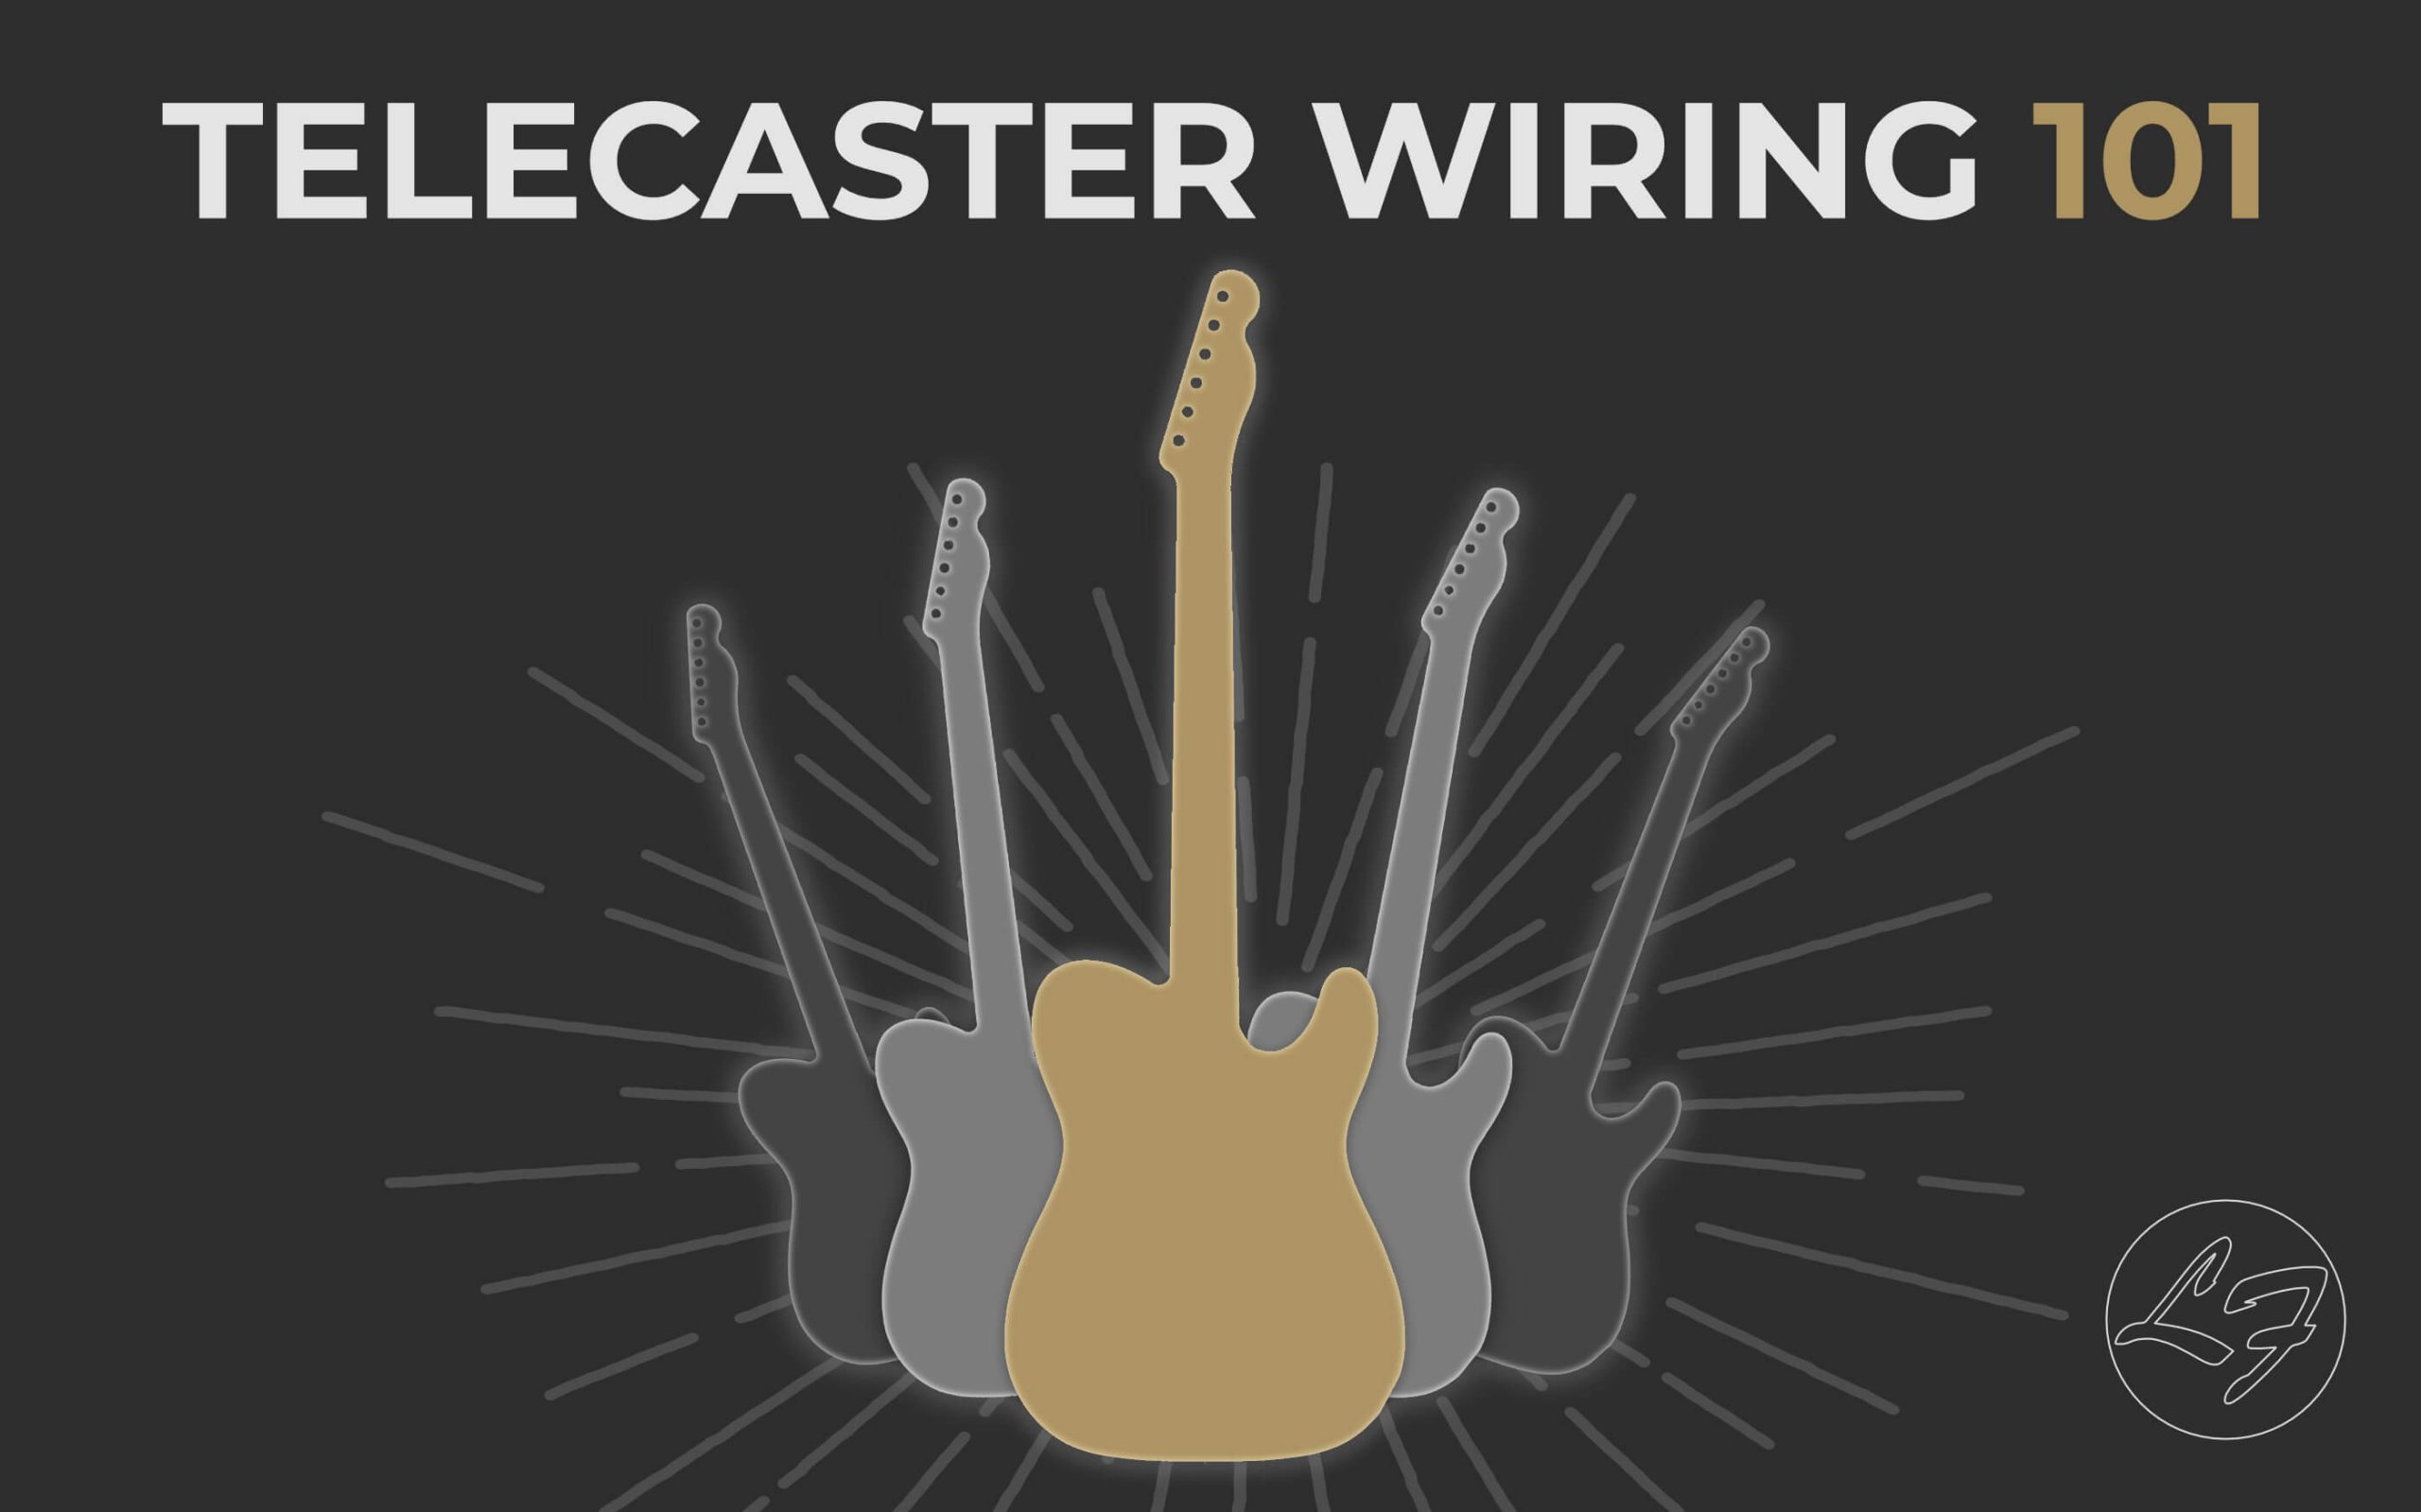 Telecaster Wiring 101 Cover Art